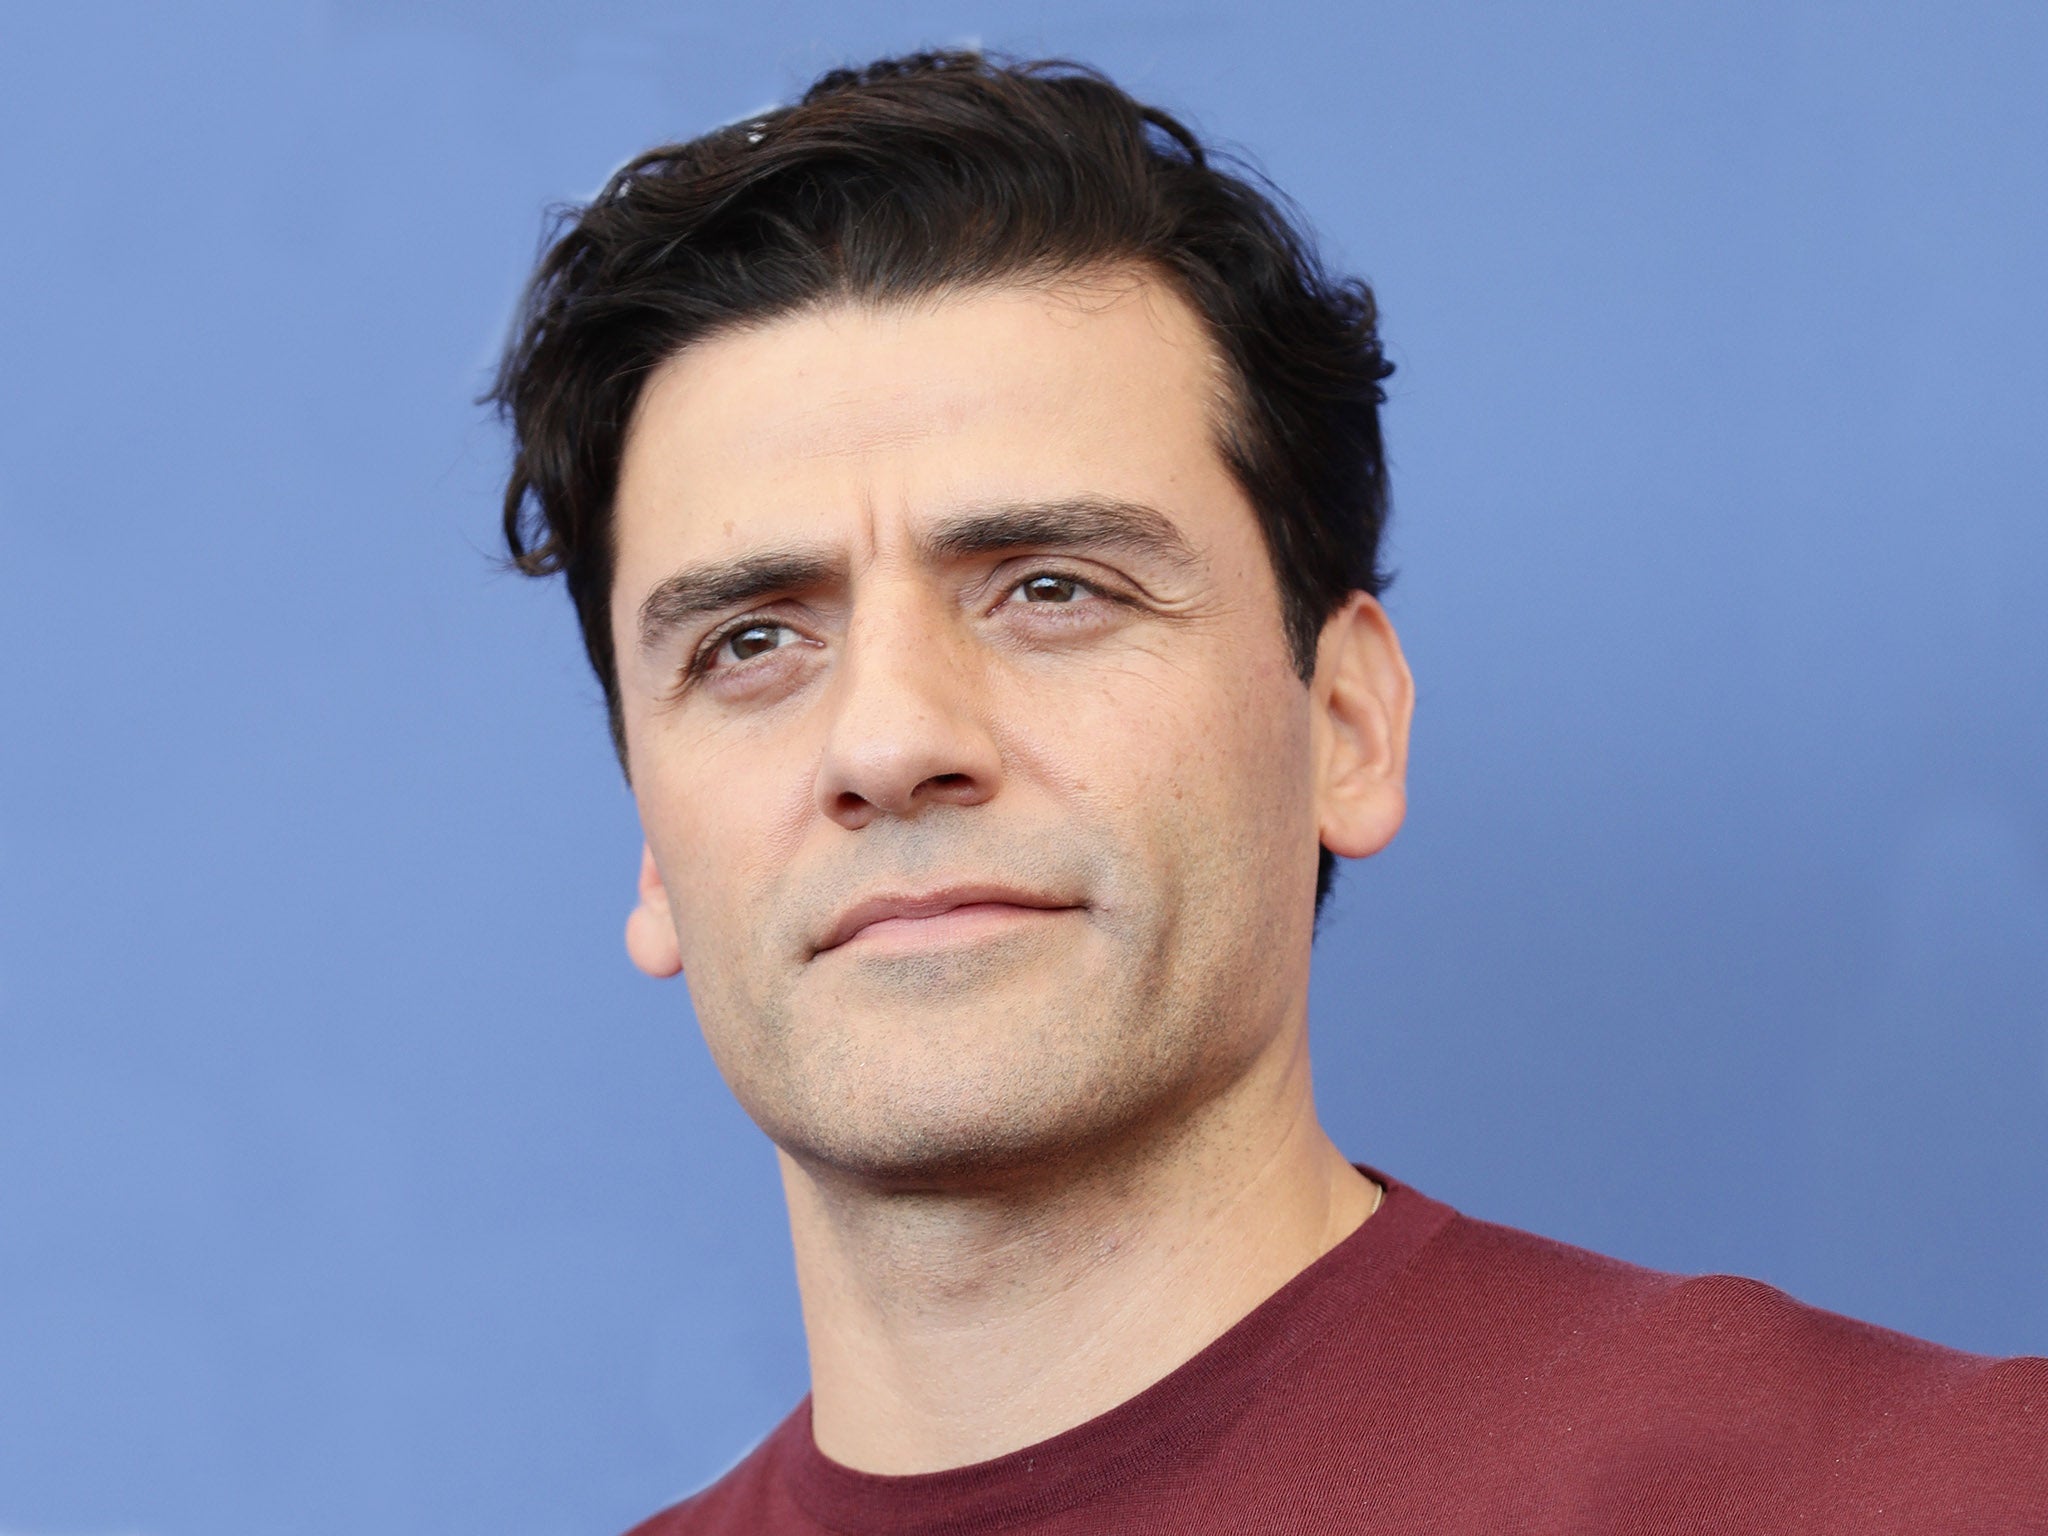 The apparently unconventional looking Oscar Isaac